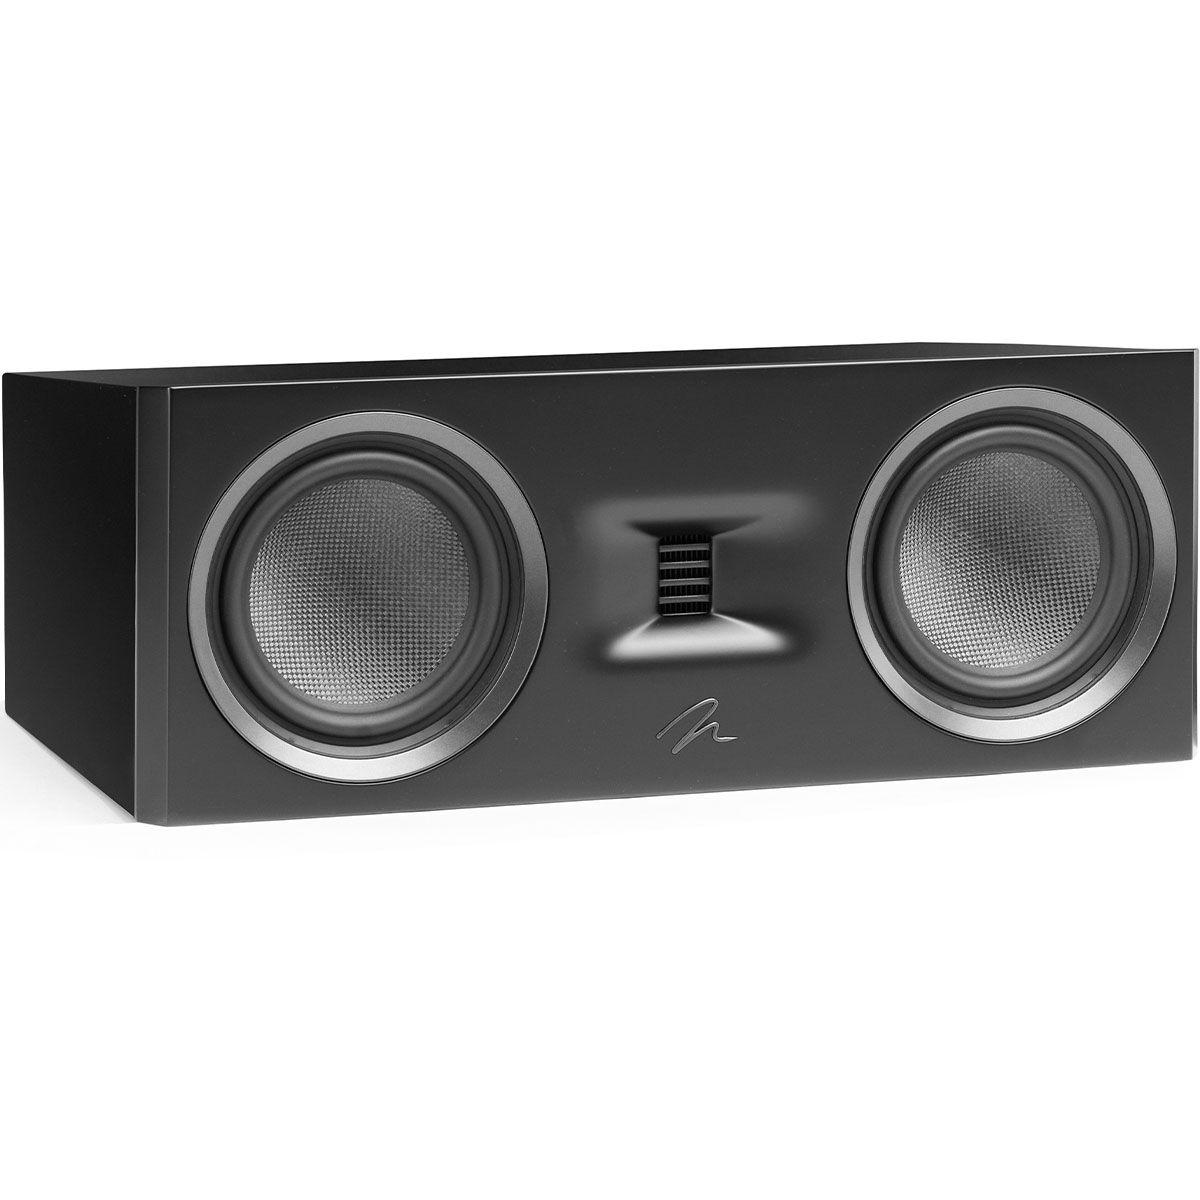 MartinLogan Motion C10  Bookshelf Speaker in black front angled view without grilles on white background